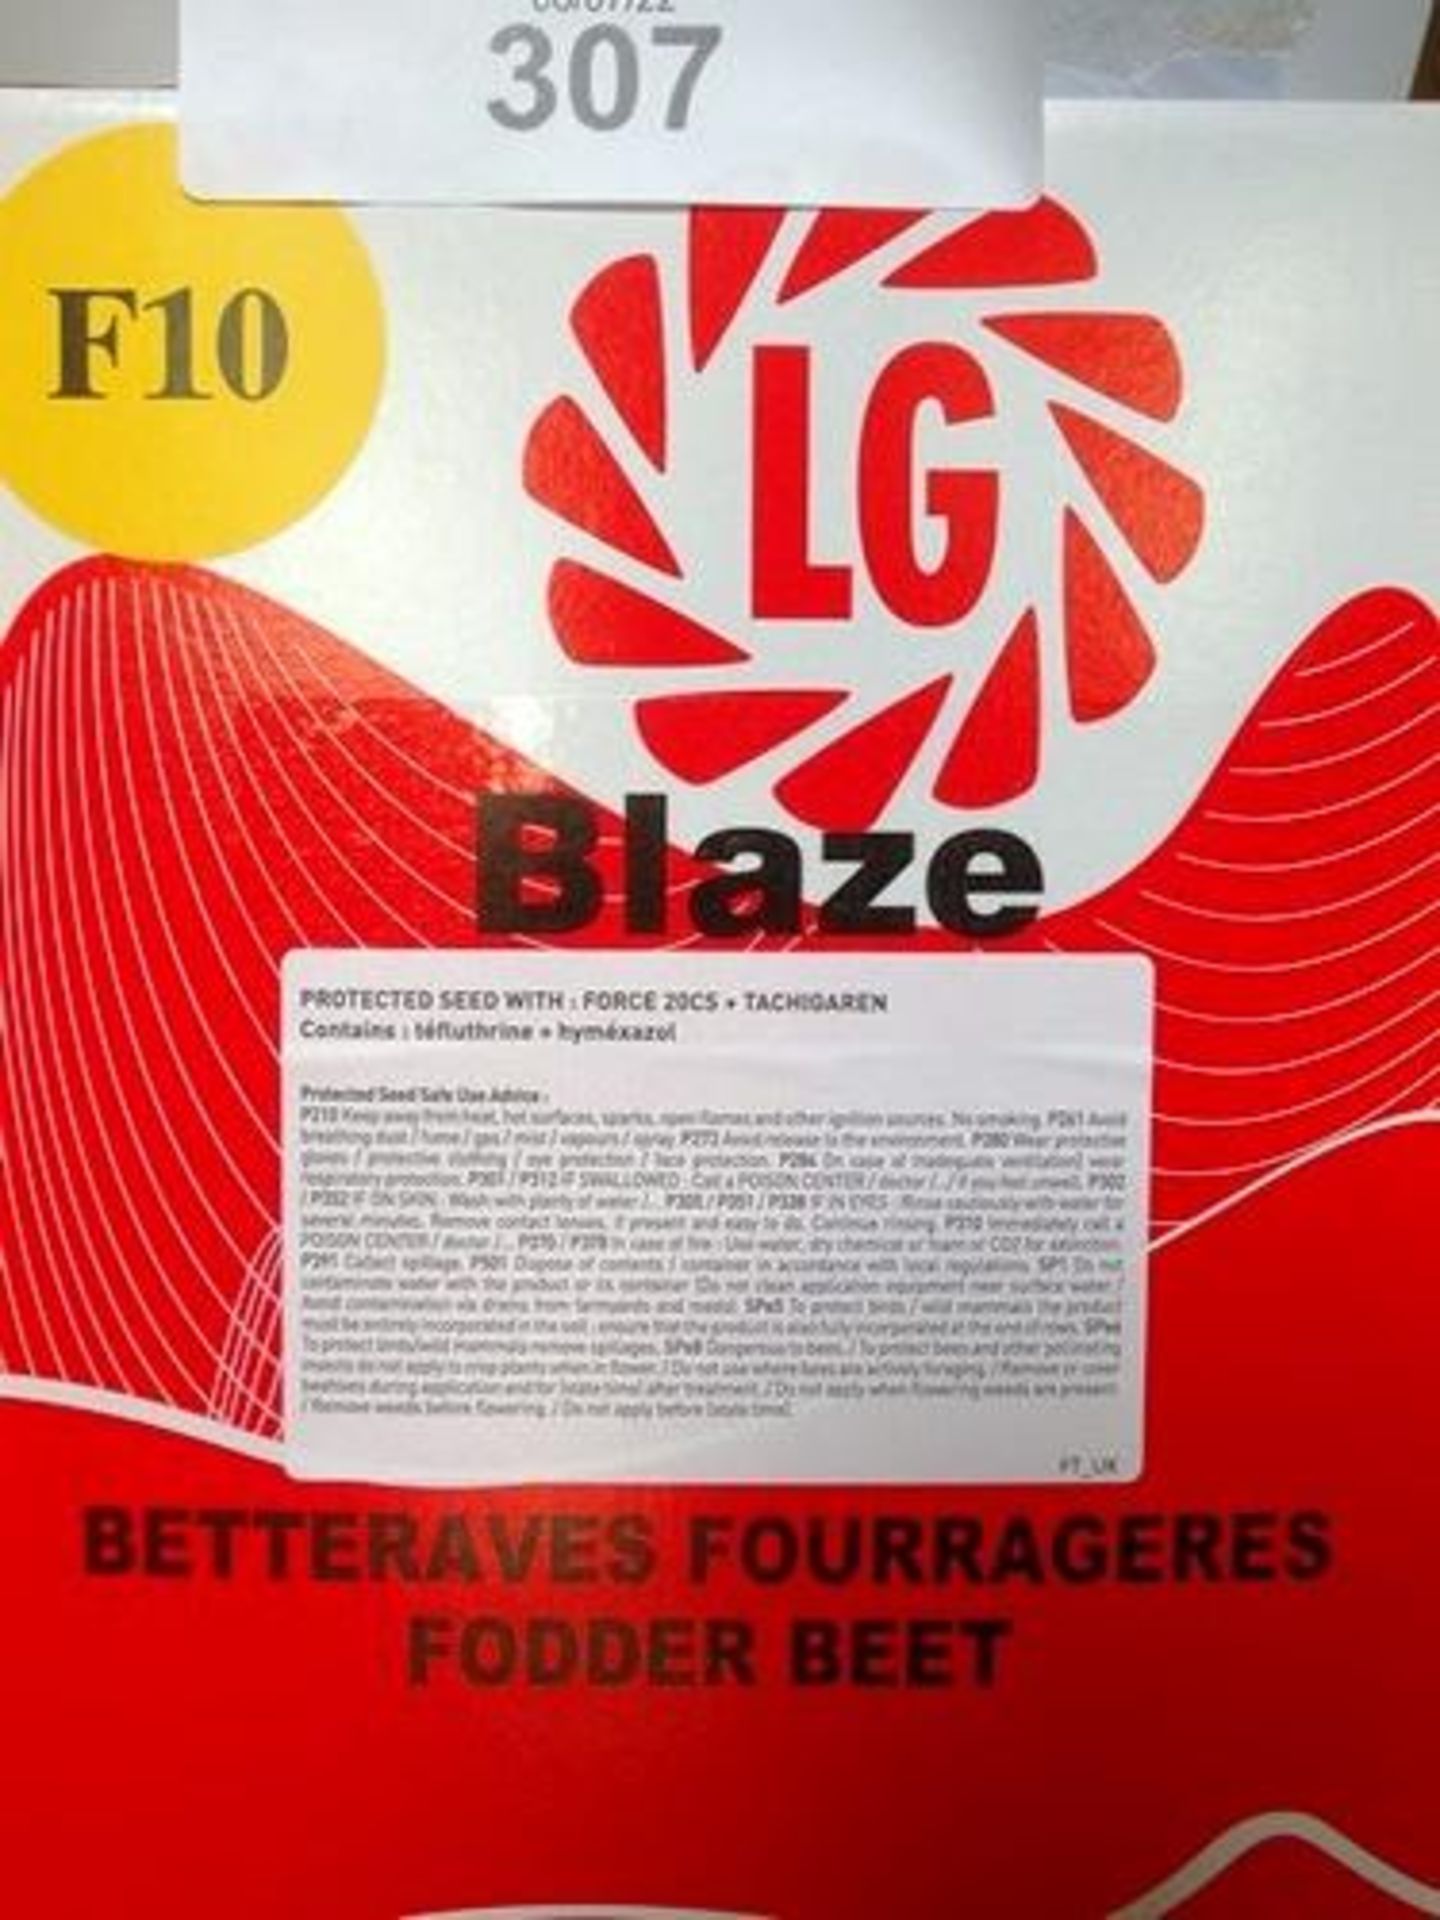 1 x box containing 4 x boxes each containing 50,000 grains of LG Blaze fodder beat, sowing rate 50,